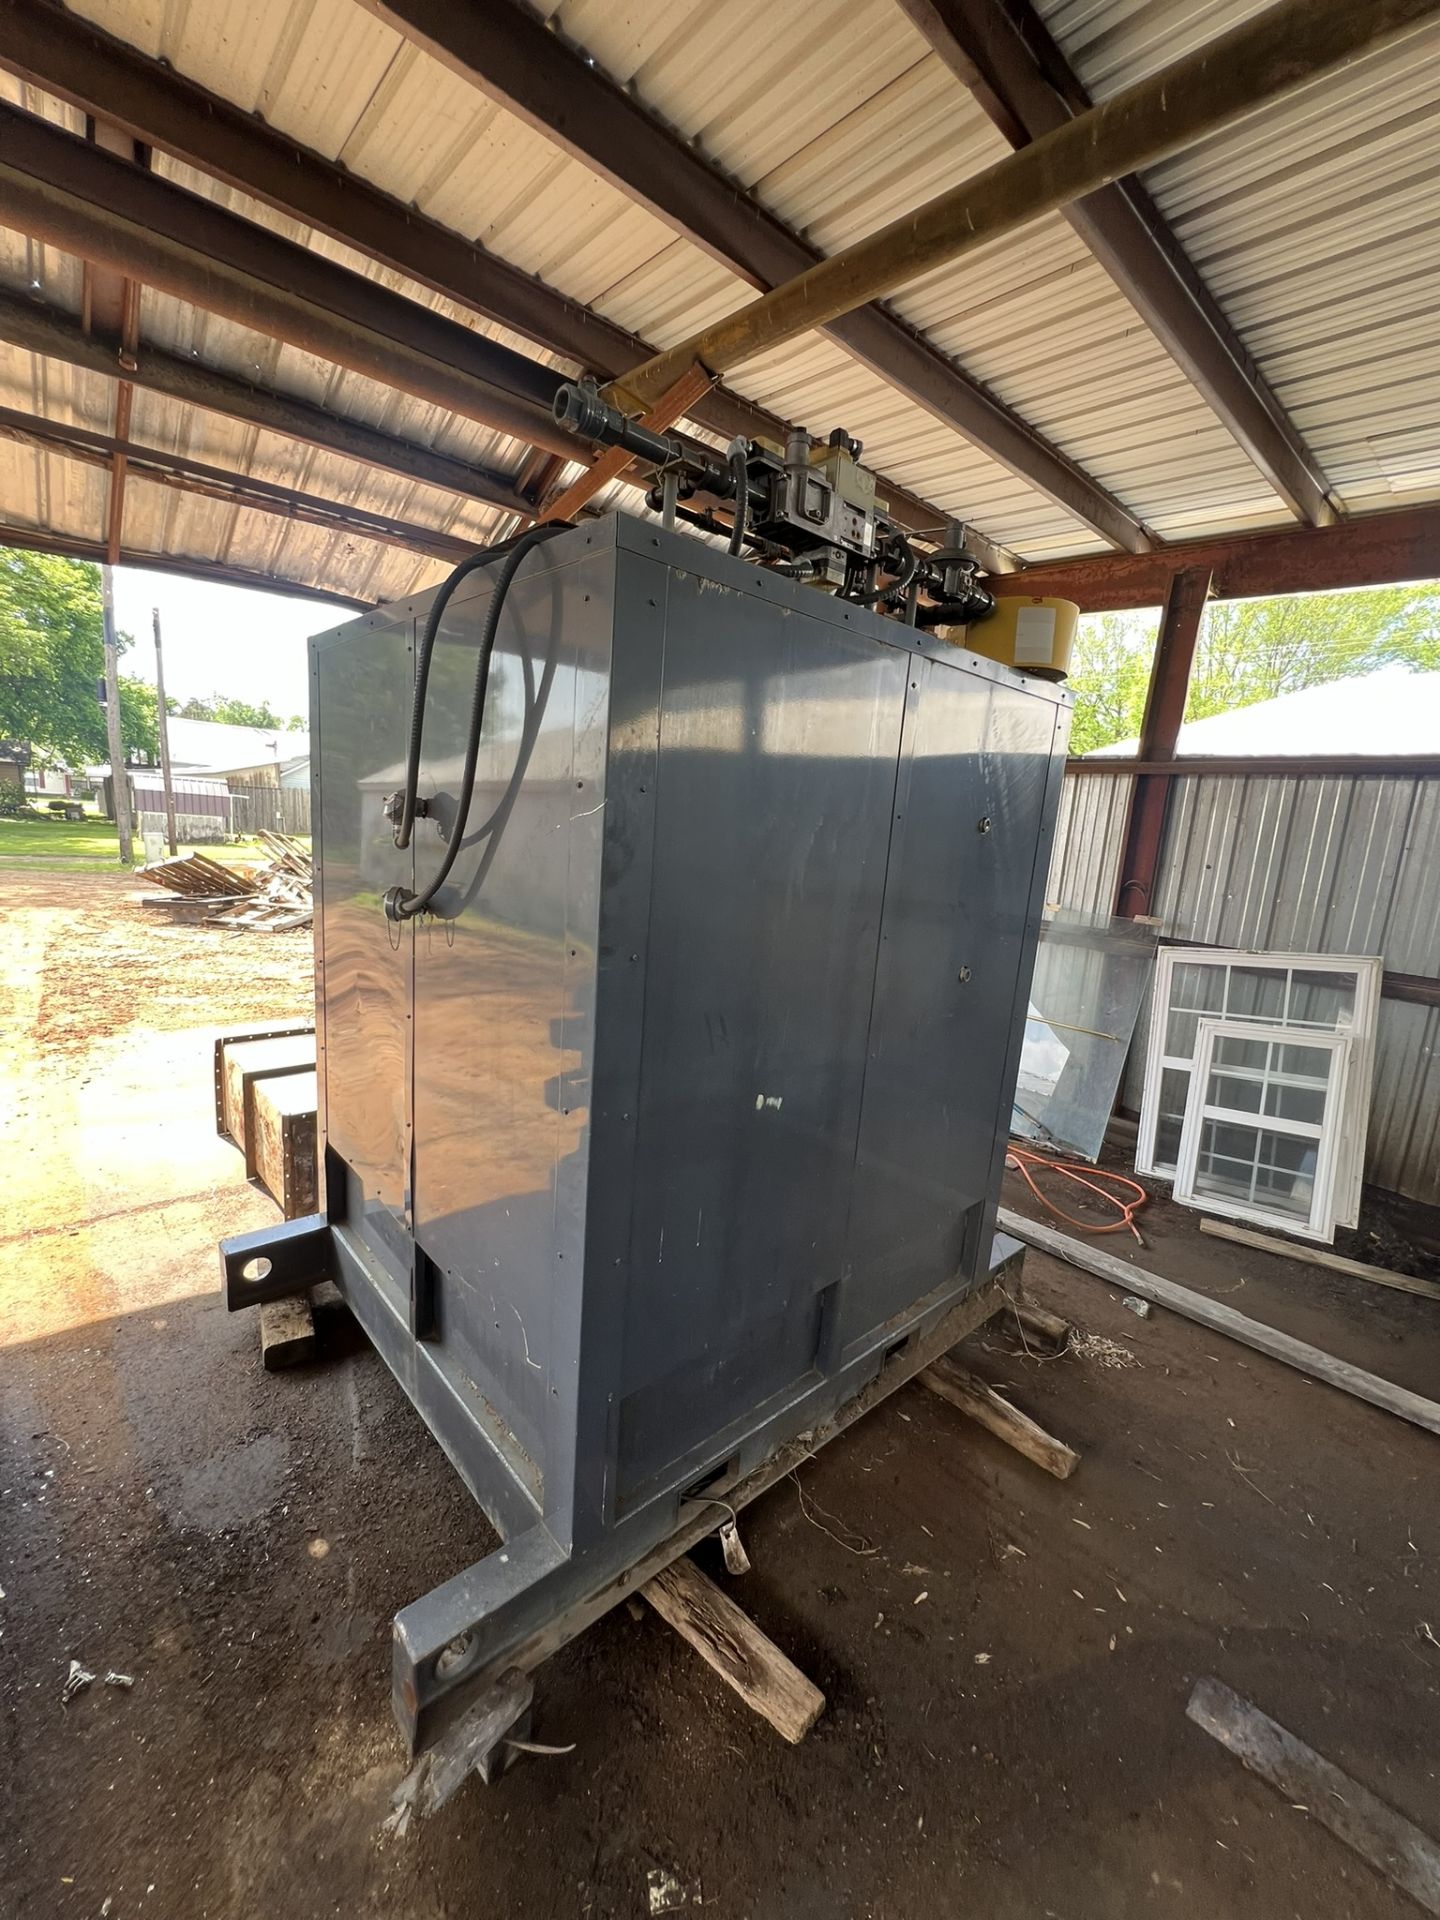 Reliance Electric Powder Coat Curing Oven, Model #10 120661, powers on - Image 3 of 10